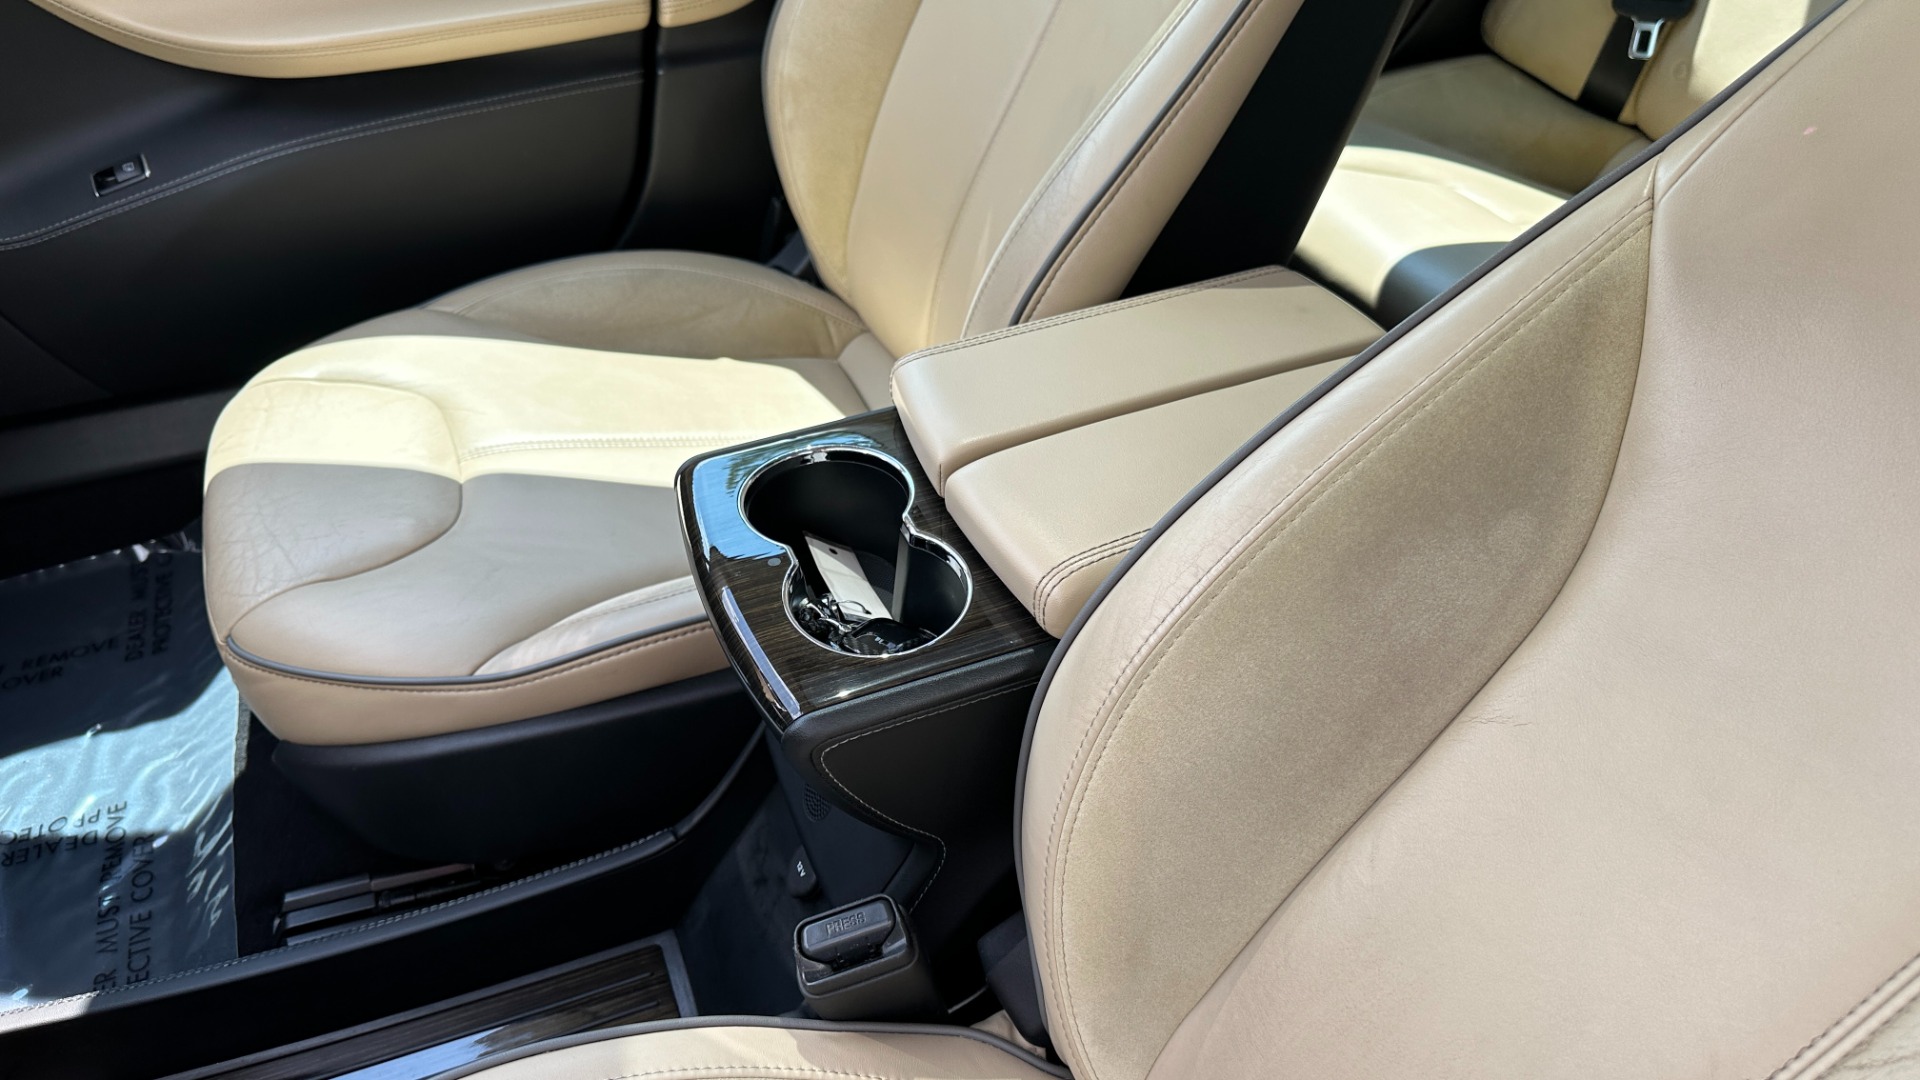 Used 2014 Tesla Model S 60 kWh Battery / 60D / PREMIUM CONNECTIVITY / LEATHER / SUNROOF for sale $19,995 at Formula Imports in Charlotte NC 28227 22